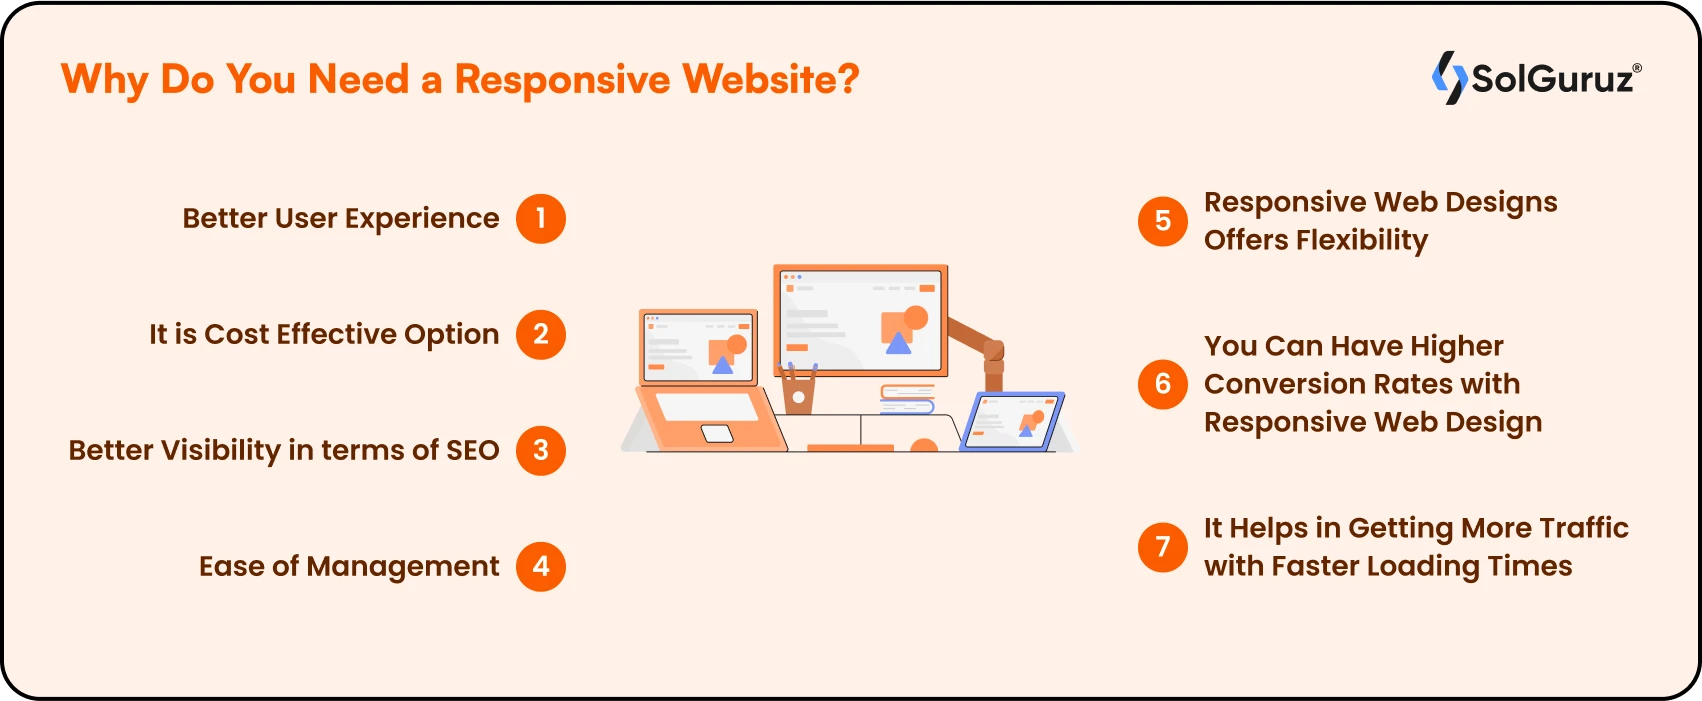 Why Do You Need a Responsive Website